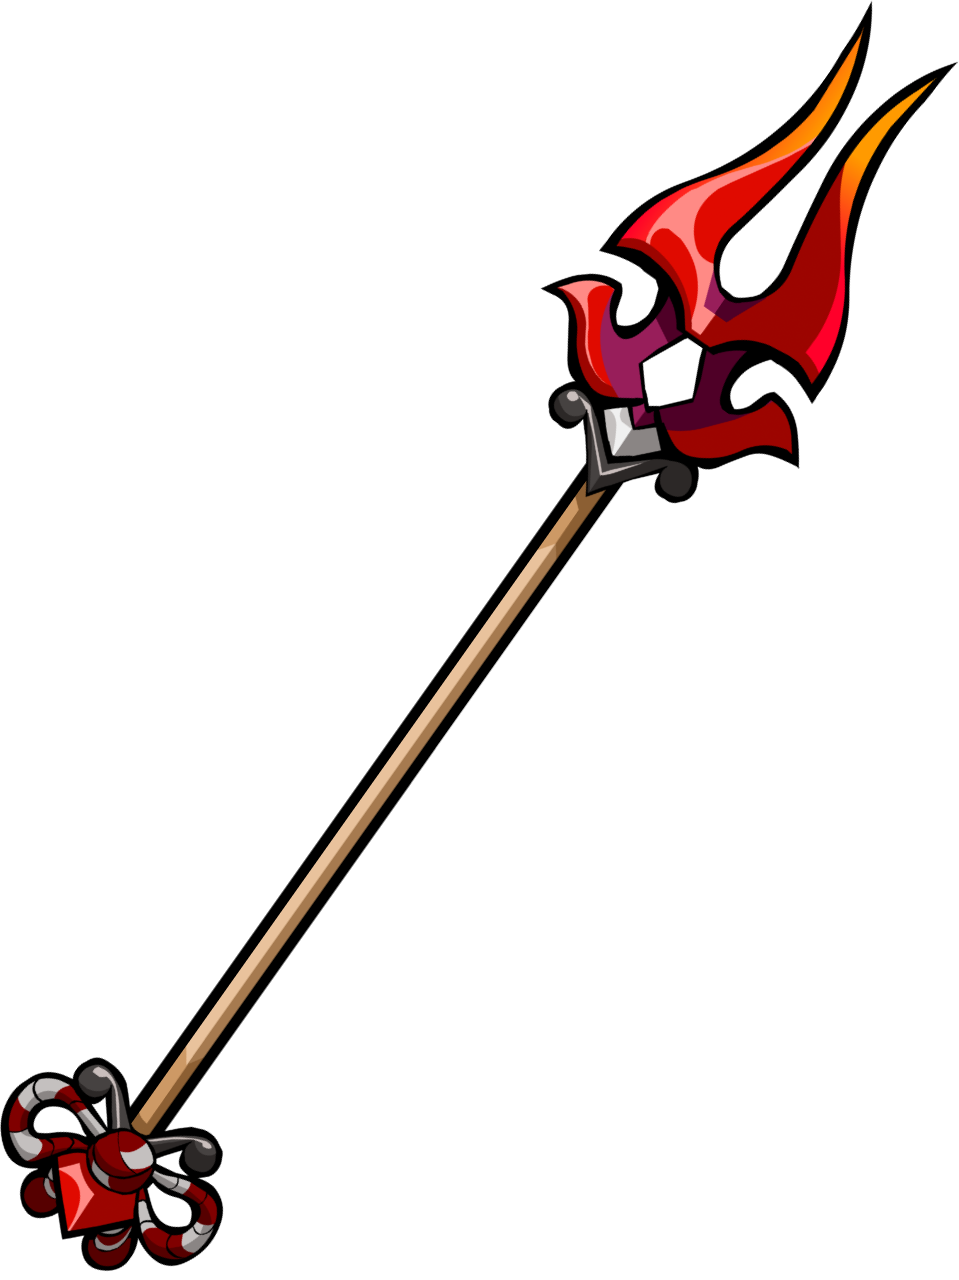 Spear_Seridashi_Classic Colors_1_959x1280.png